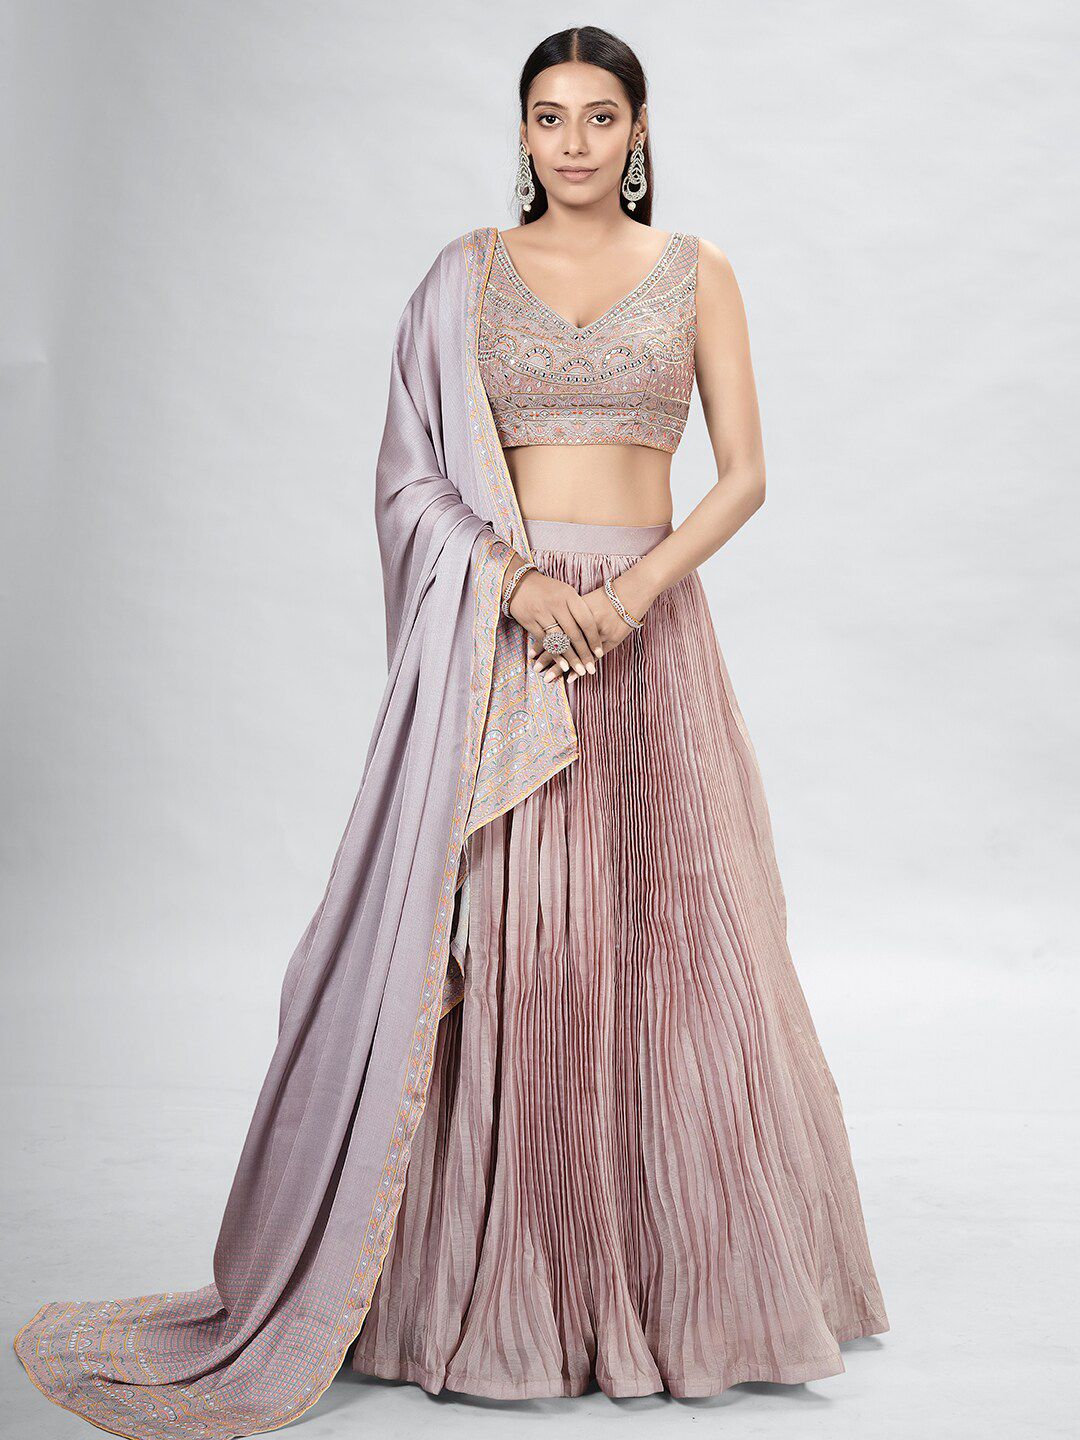 DRESSTIVE Grey & Peach-Coloured Embroidered Semi-Stitched Lehenga & Unstitched Blouse With Dupatta Price in India